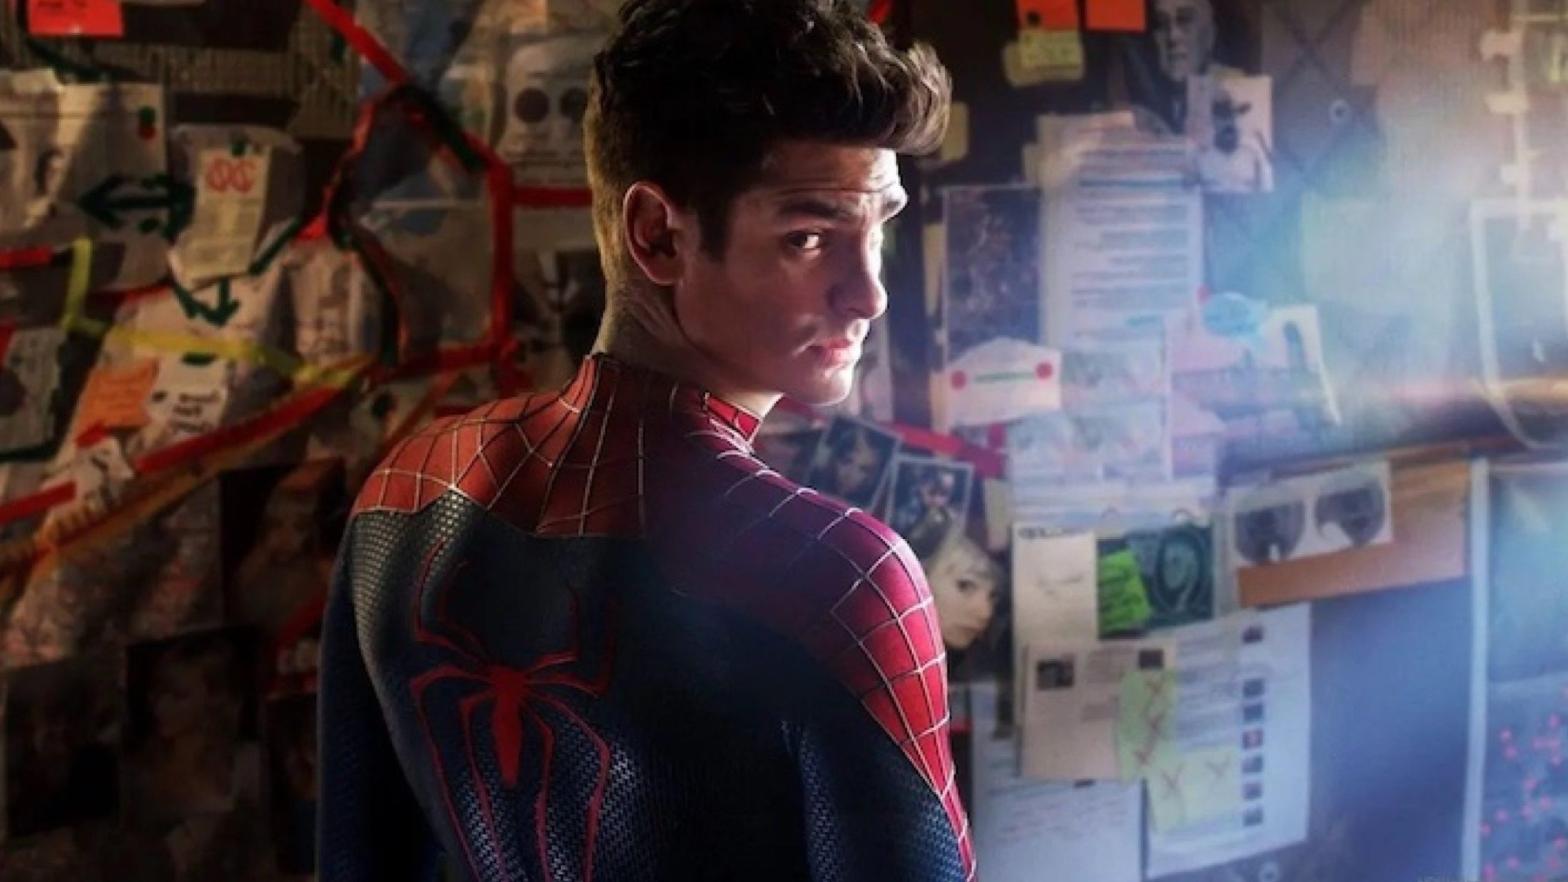 Andrew Garfield, as he appeared in promo material for The Amazing Spider-Man 2. (Image: Sony Pictures)